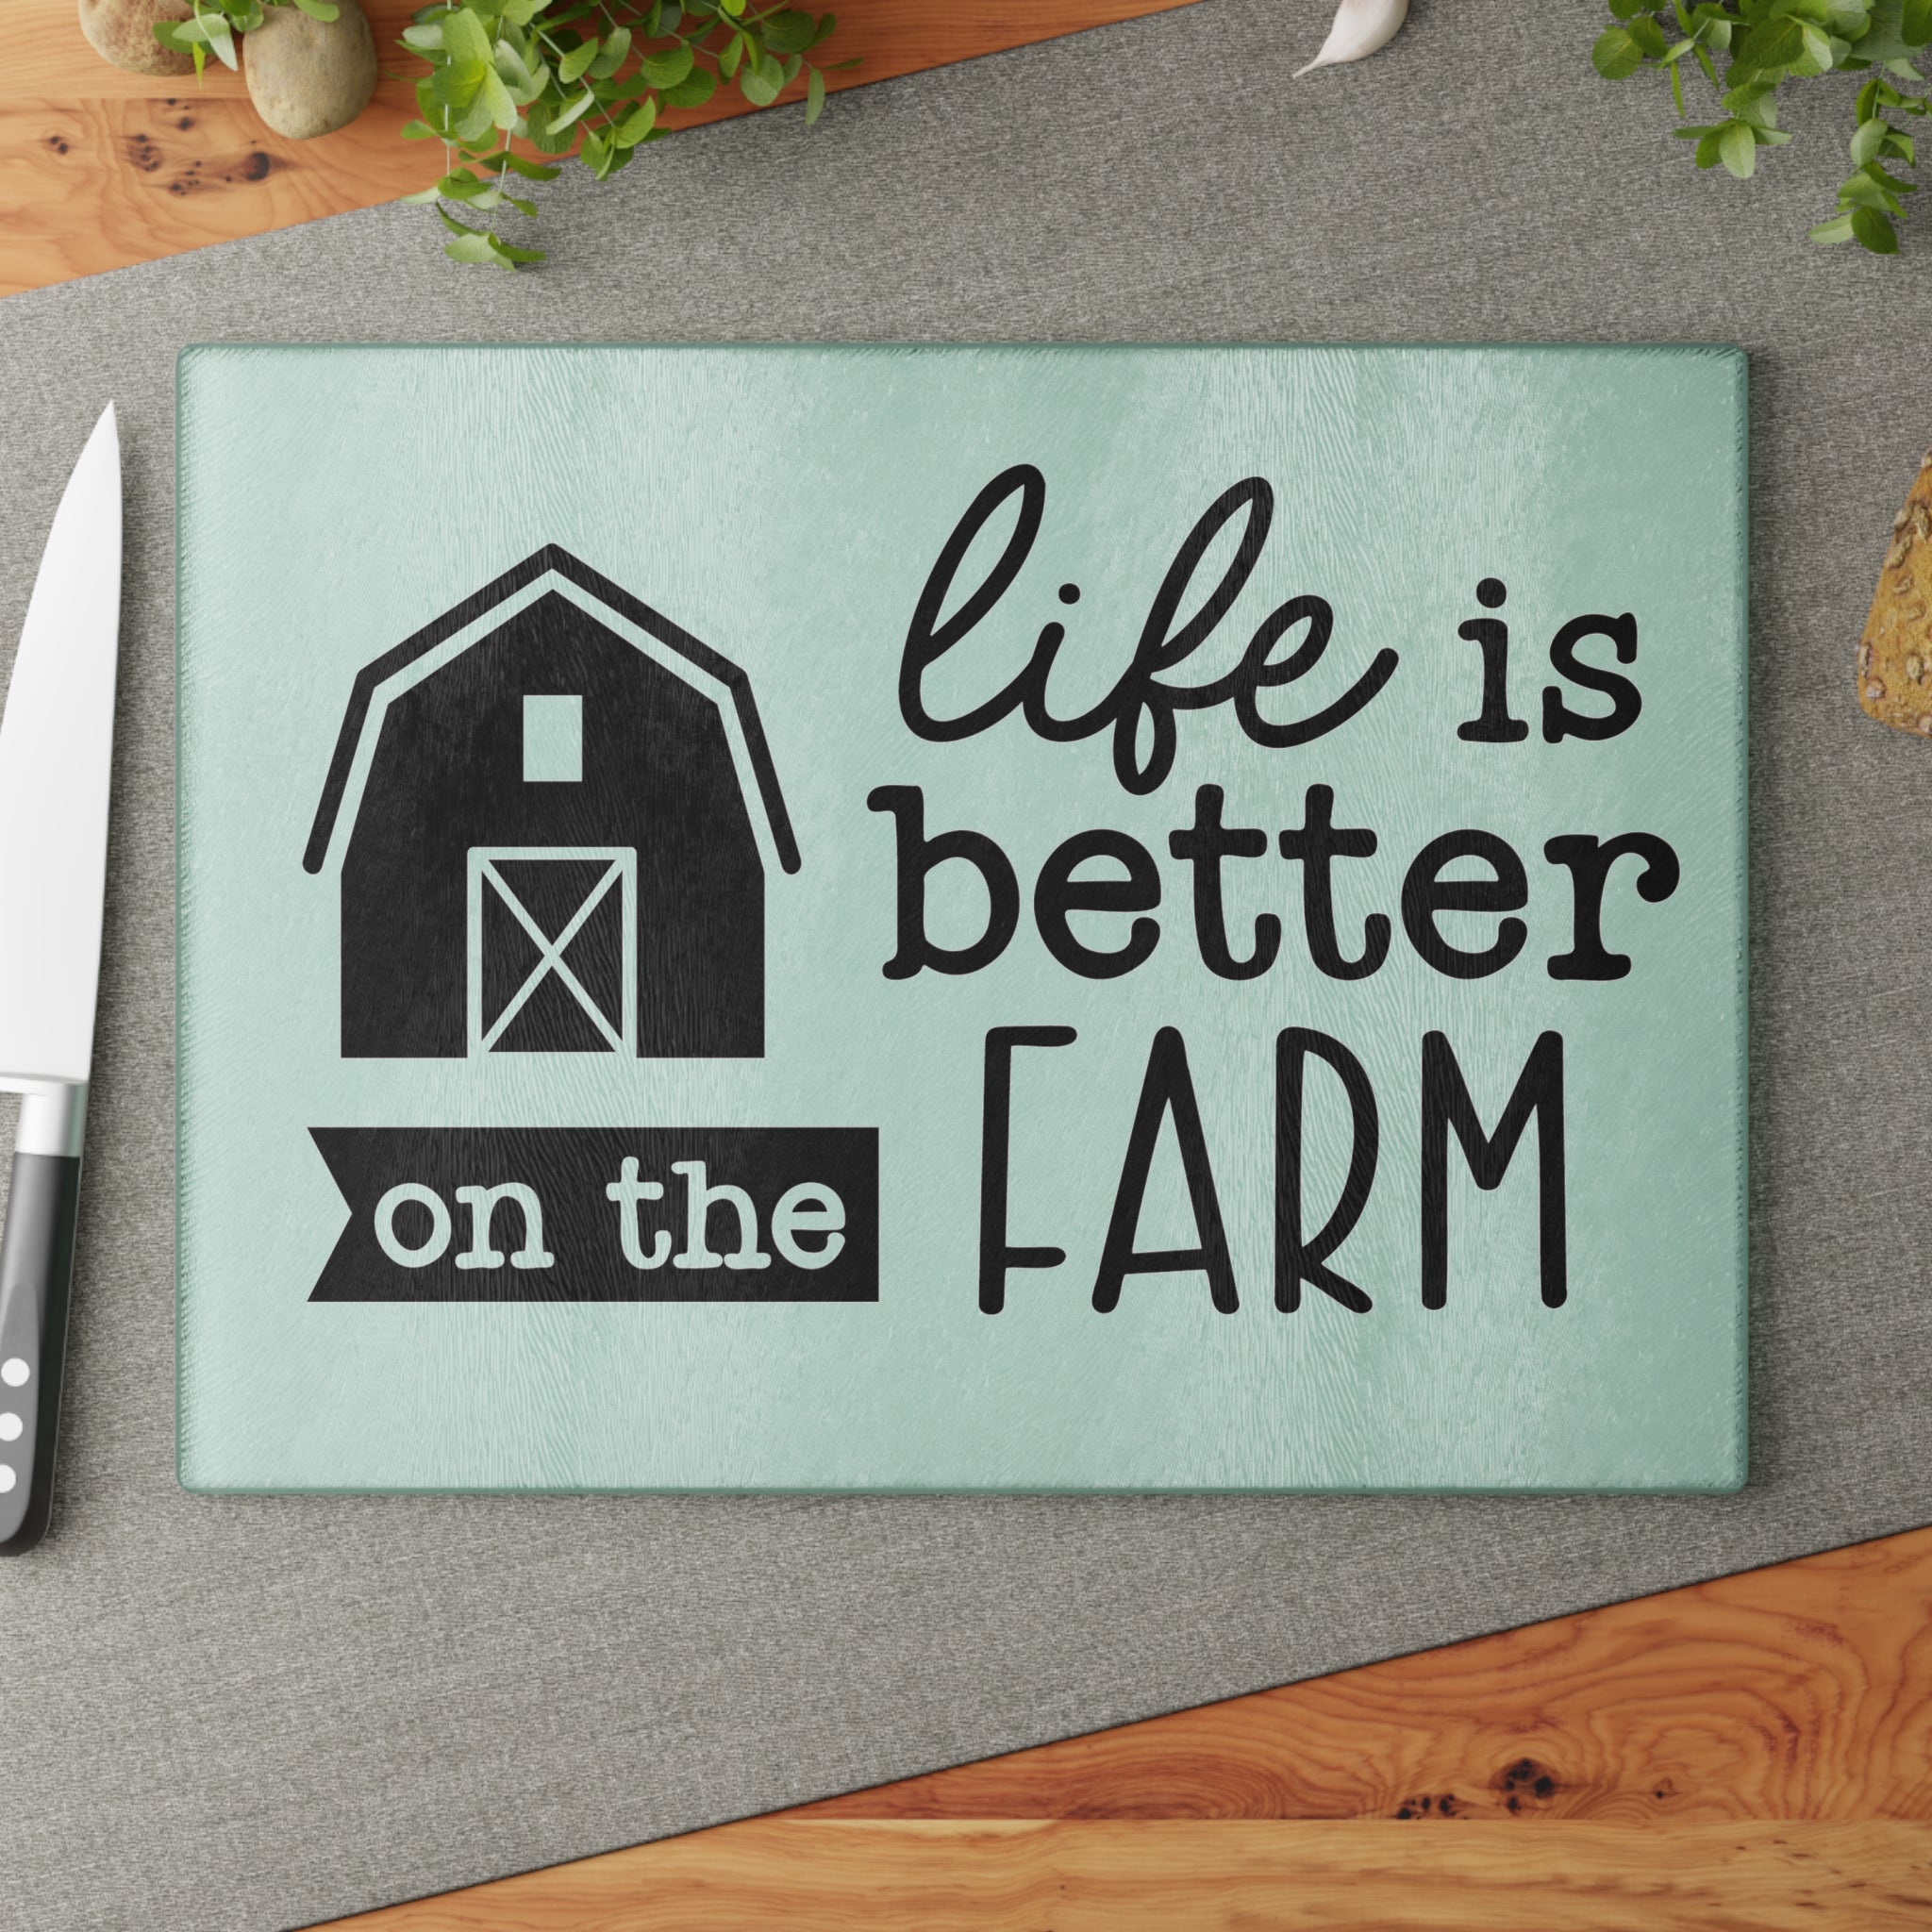 glass cutting board with the words "life is better on the farm" on a brown table with a gray runner and knive as decorwhite background